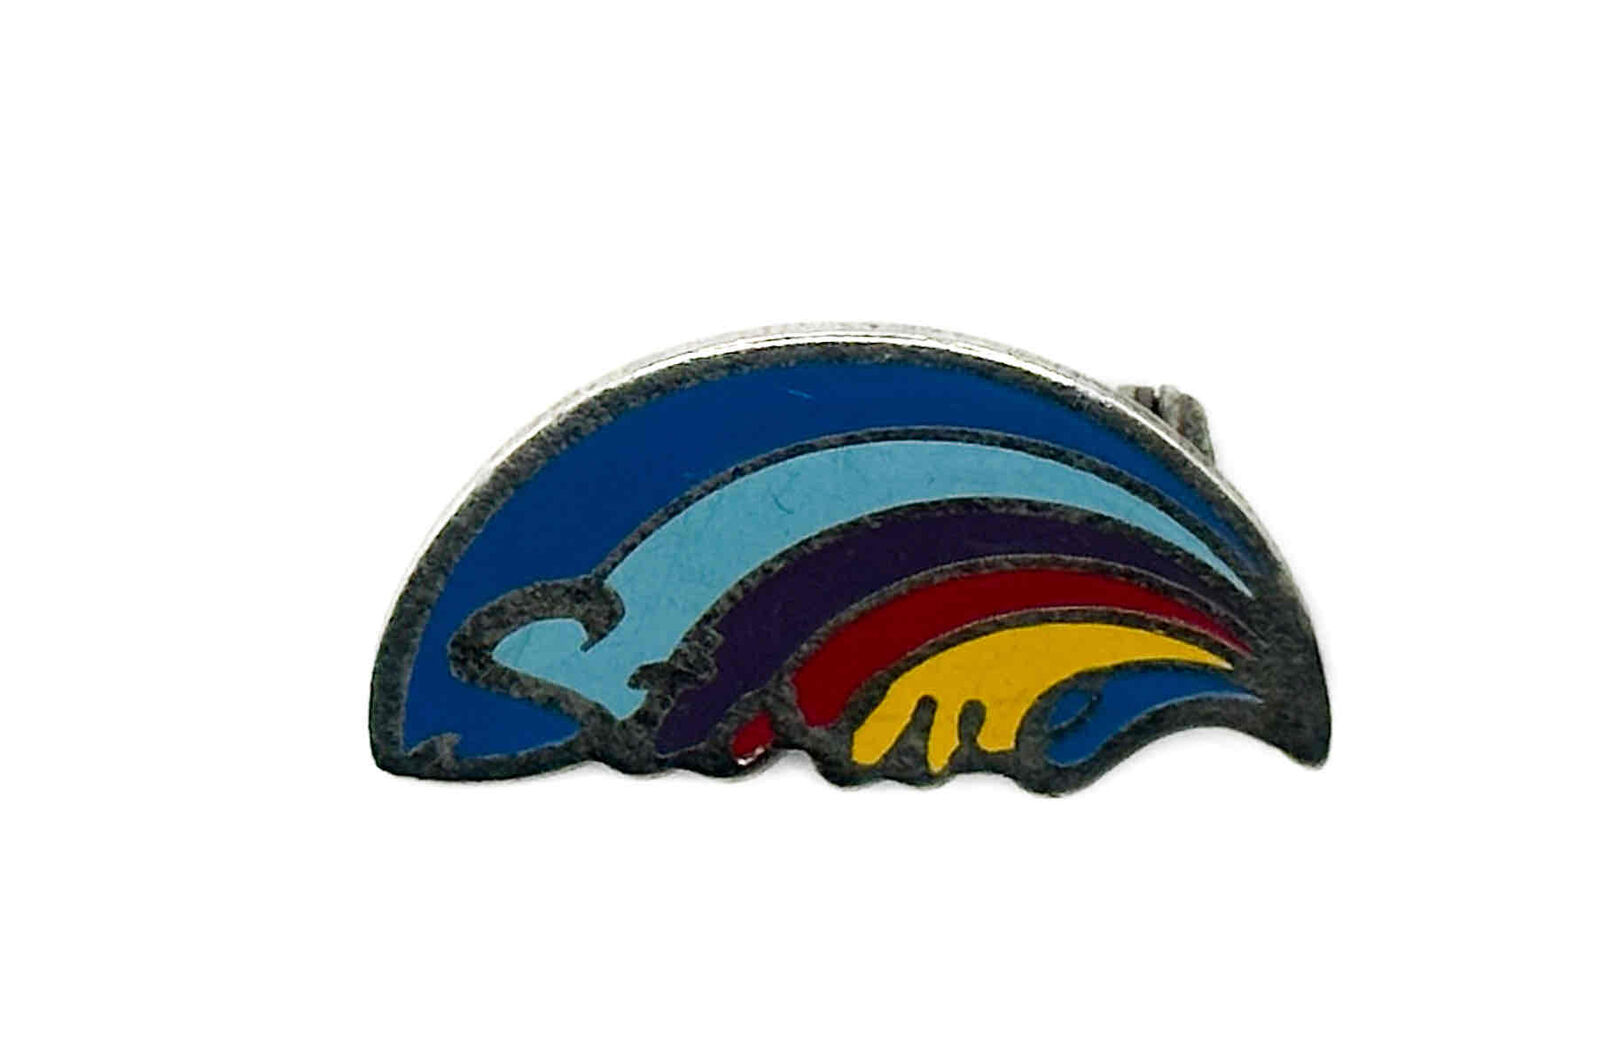 Stowe Vermont Multicolor Vintage Ski Collectible Brooch Lapel Pin